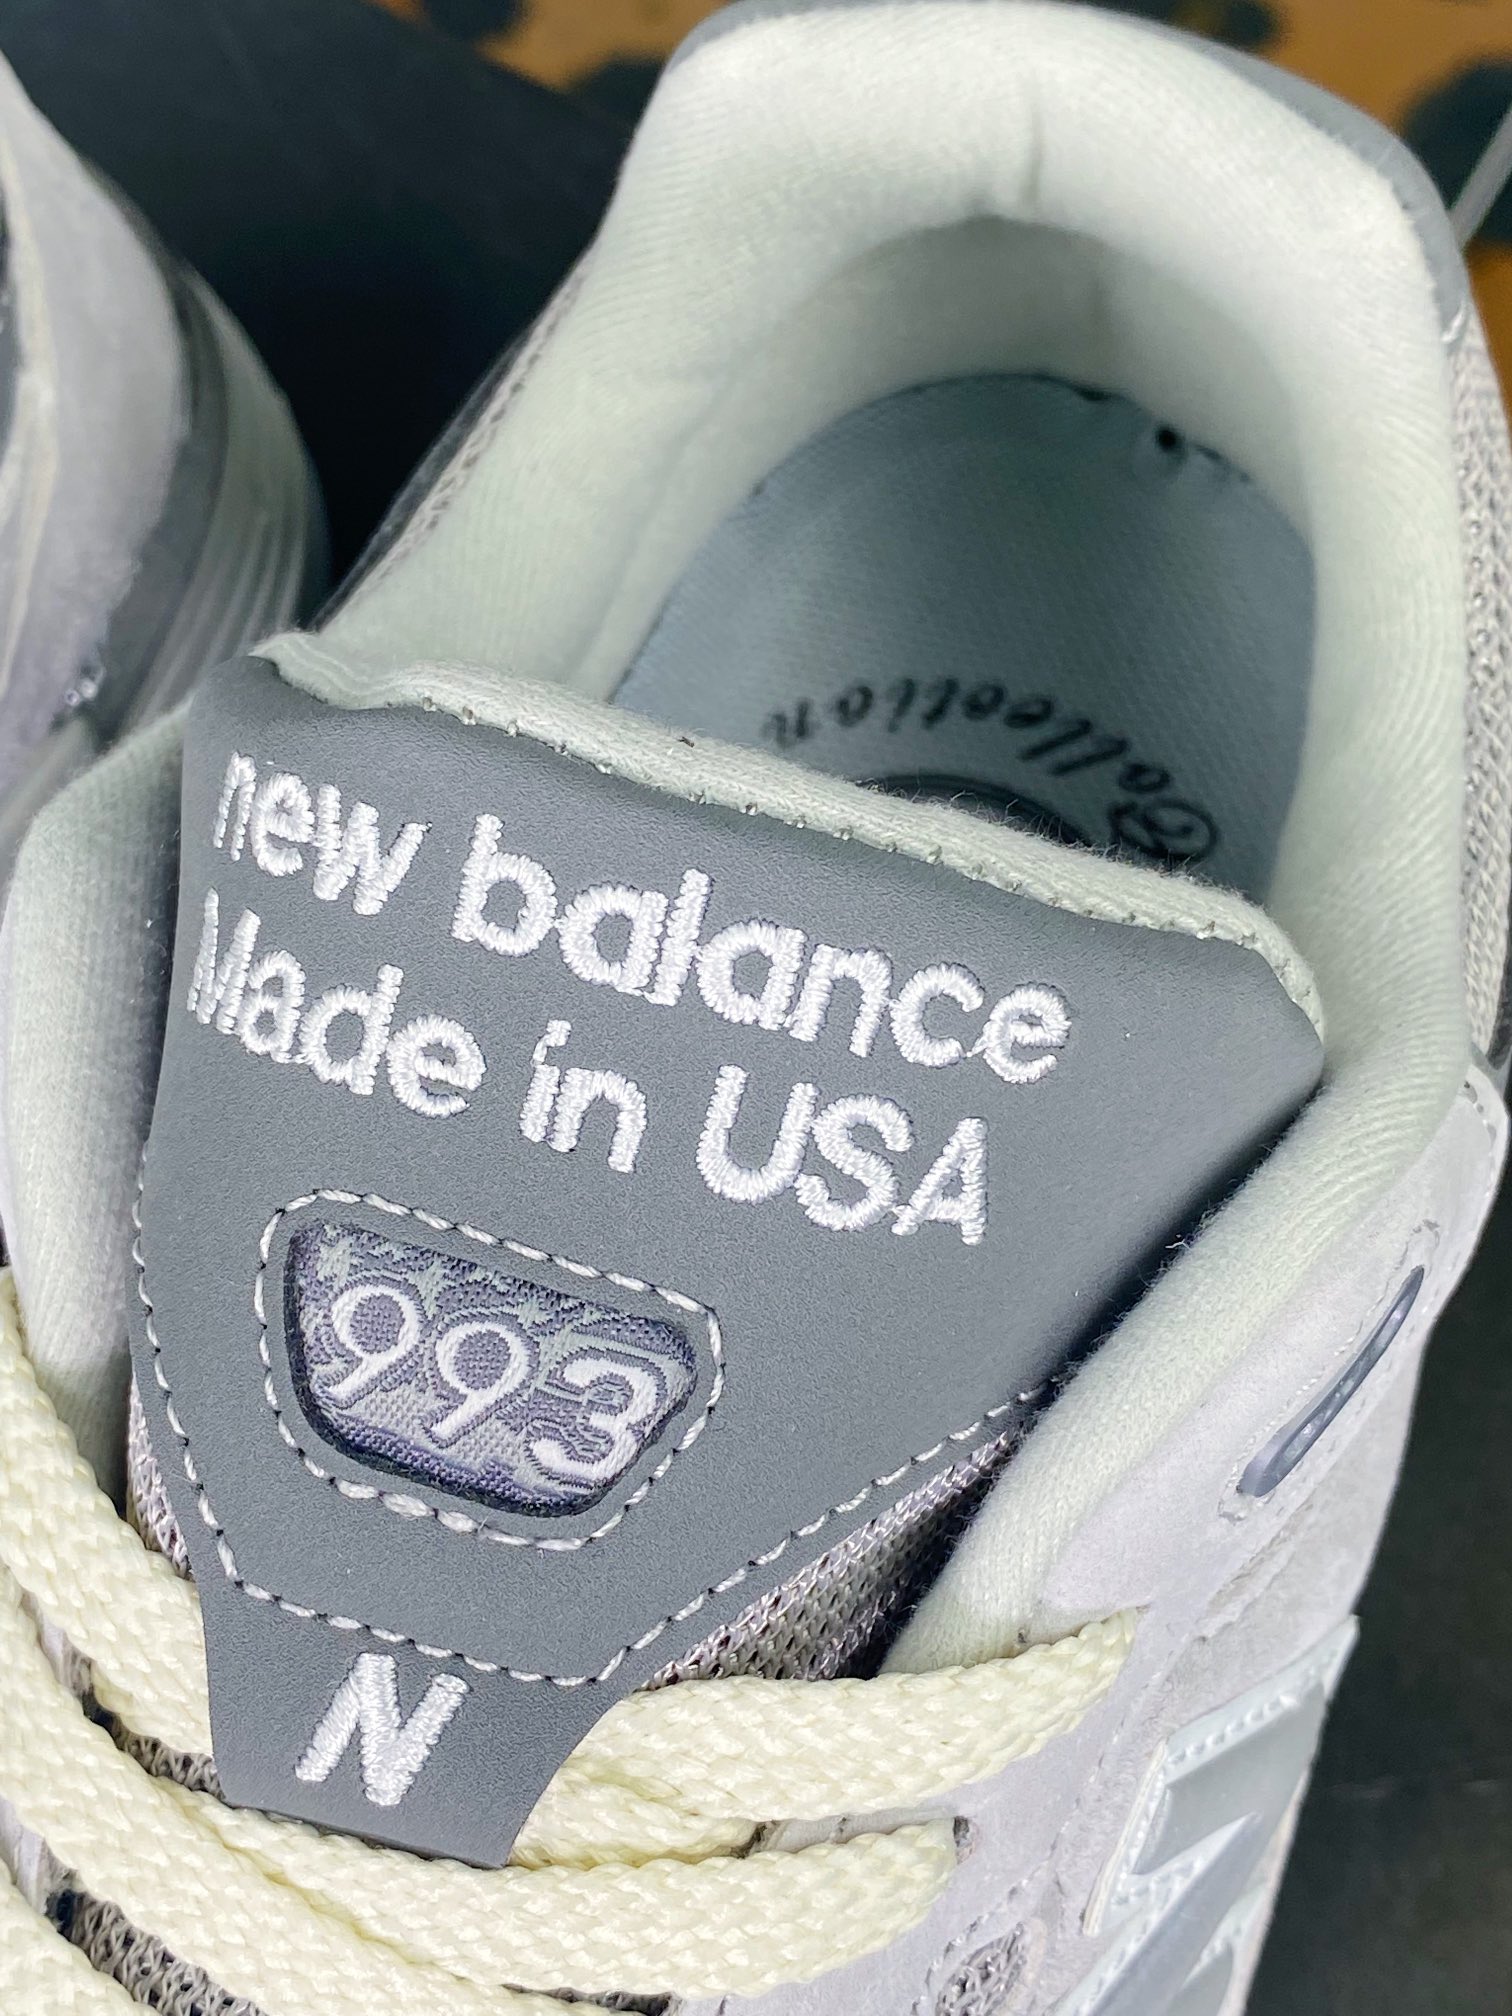 New Balance Made in USA M993 series American-made running shoes 